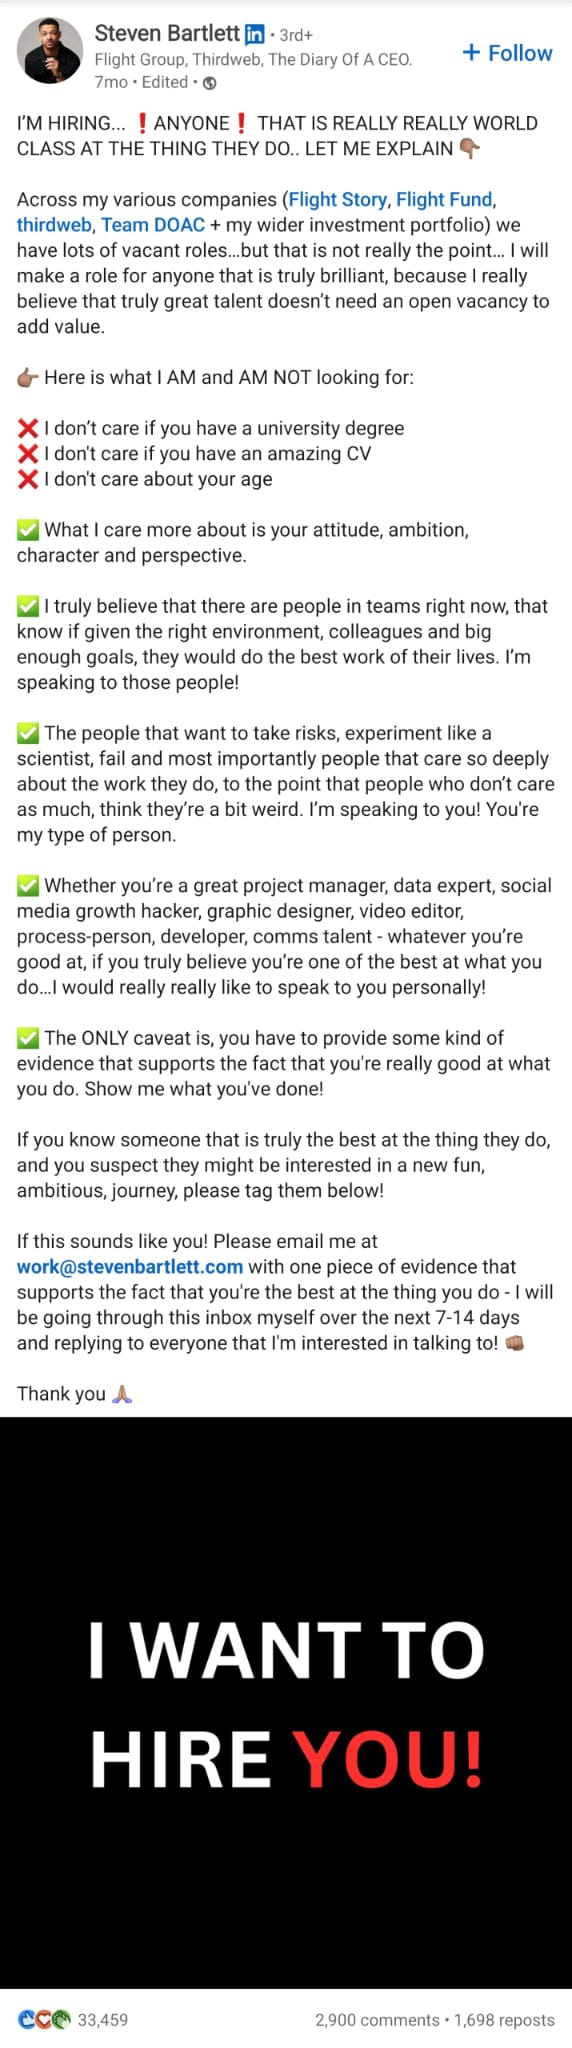 A LinkedIn post from Steven Bartlett hiring people for his company